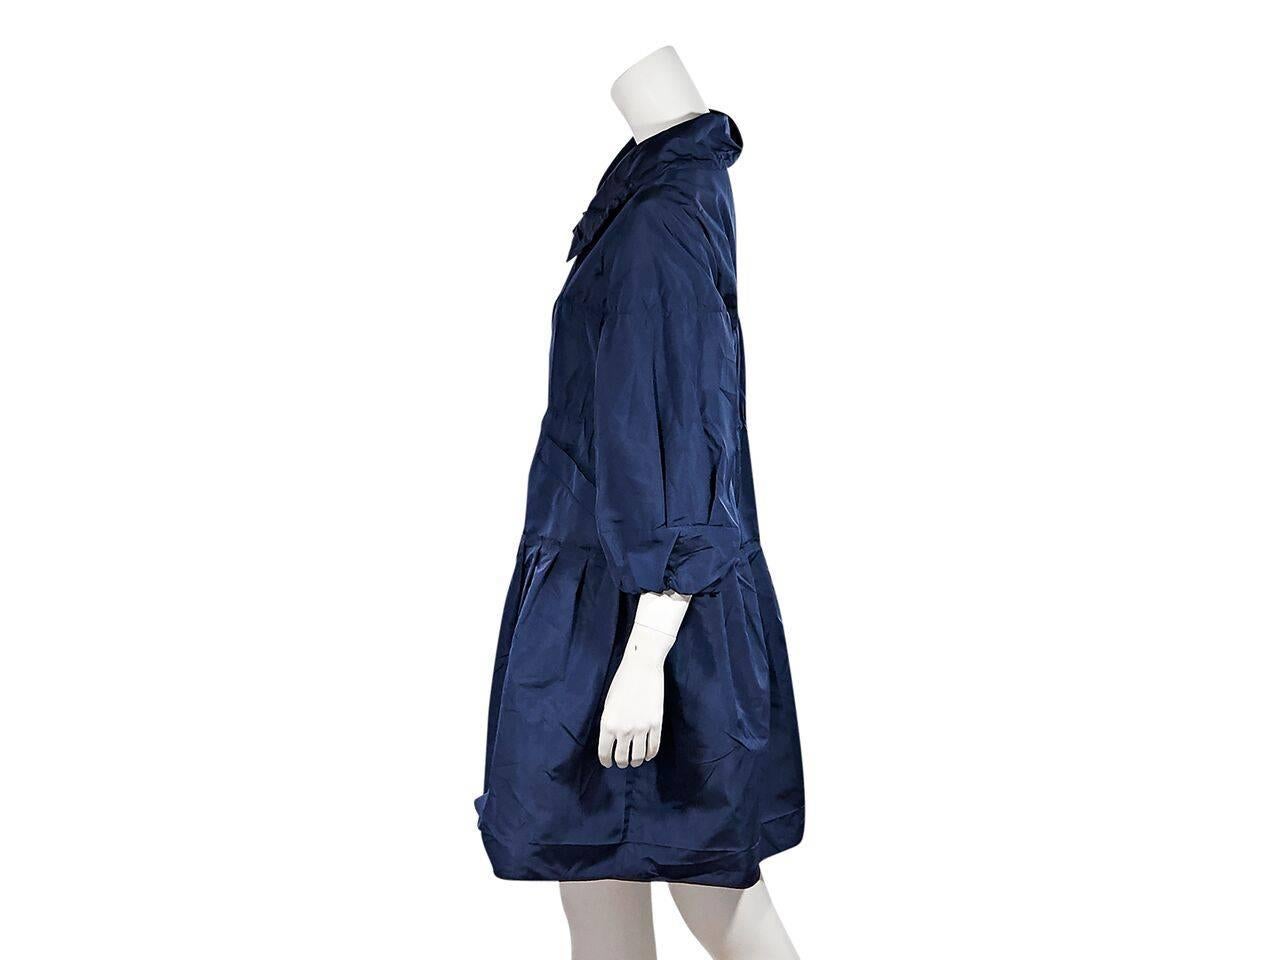 Product details:  Lightweight blue nylon coat by Prada.  Spread collar.  Three-quarter length sleeves.  Waist slide pockets.  Concealed front closure.  Pleated skirting. Label size IT 44.
Condition: Pre-owned. Very good.
Est. Retail $ 1,095.00